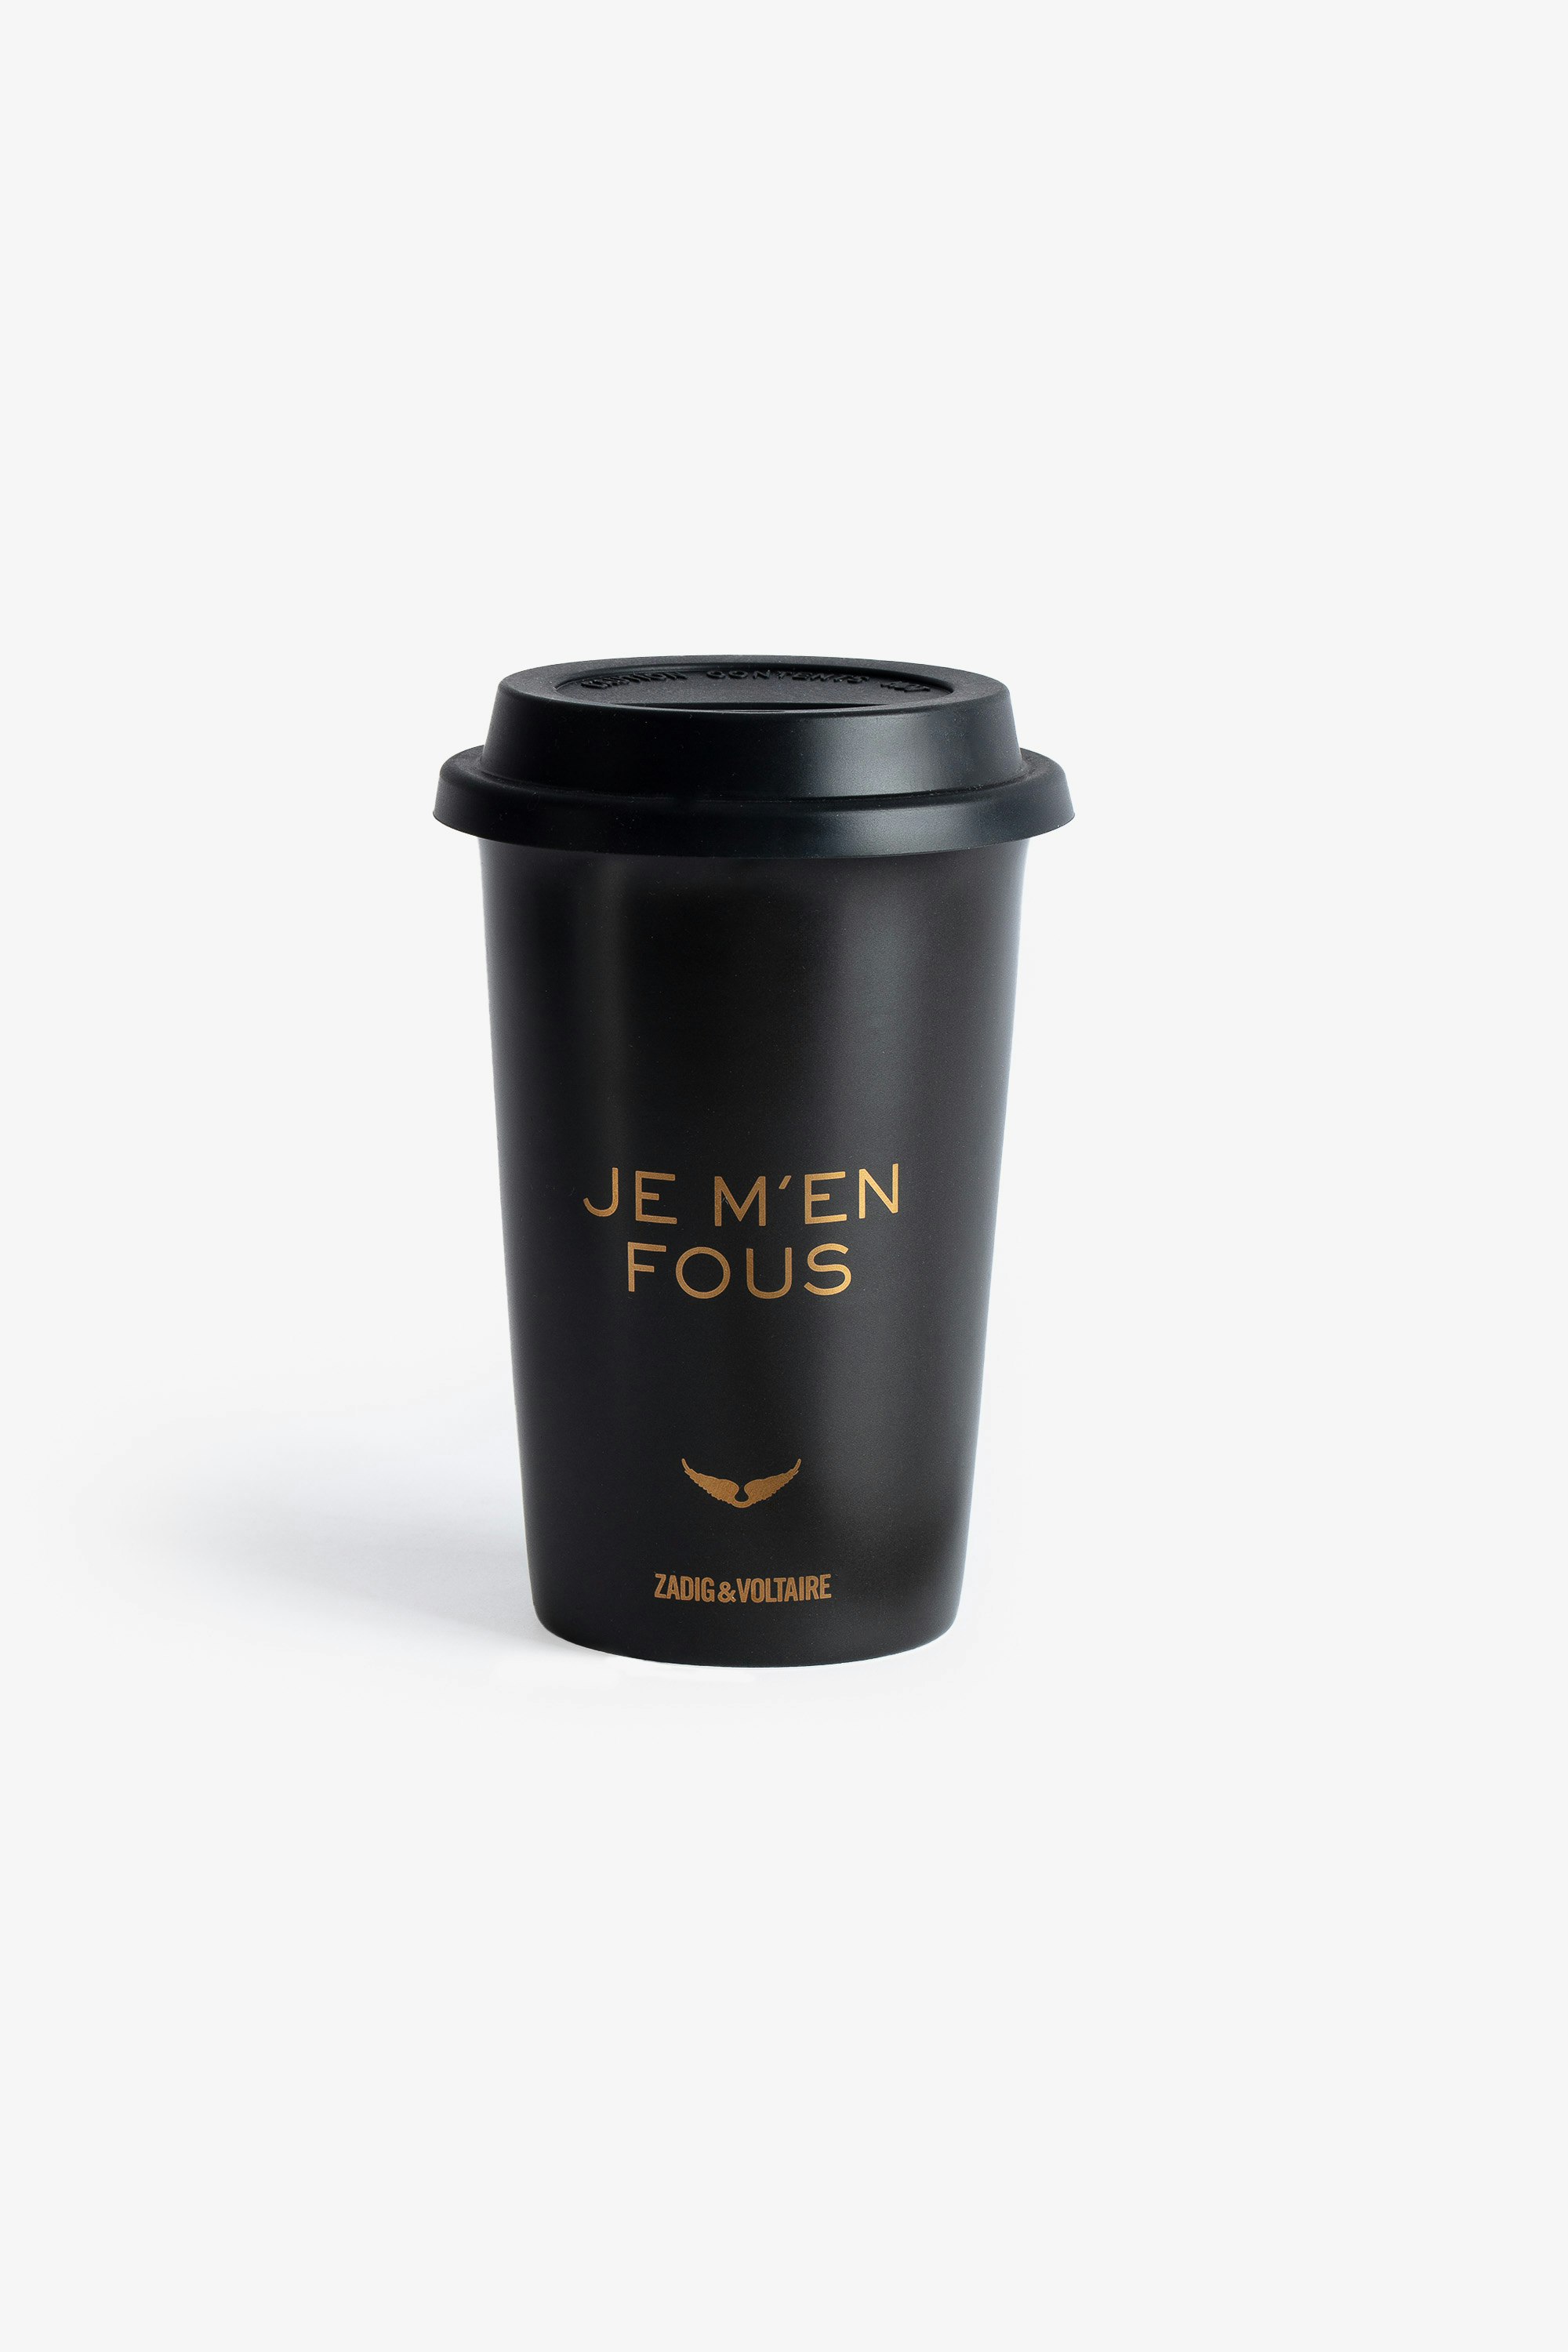 Cup of Joy - Voltaire Vice black ceramic mug with lid decorated with slogans, the wings motif and Zadig&Voltaire signature.